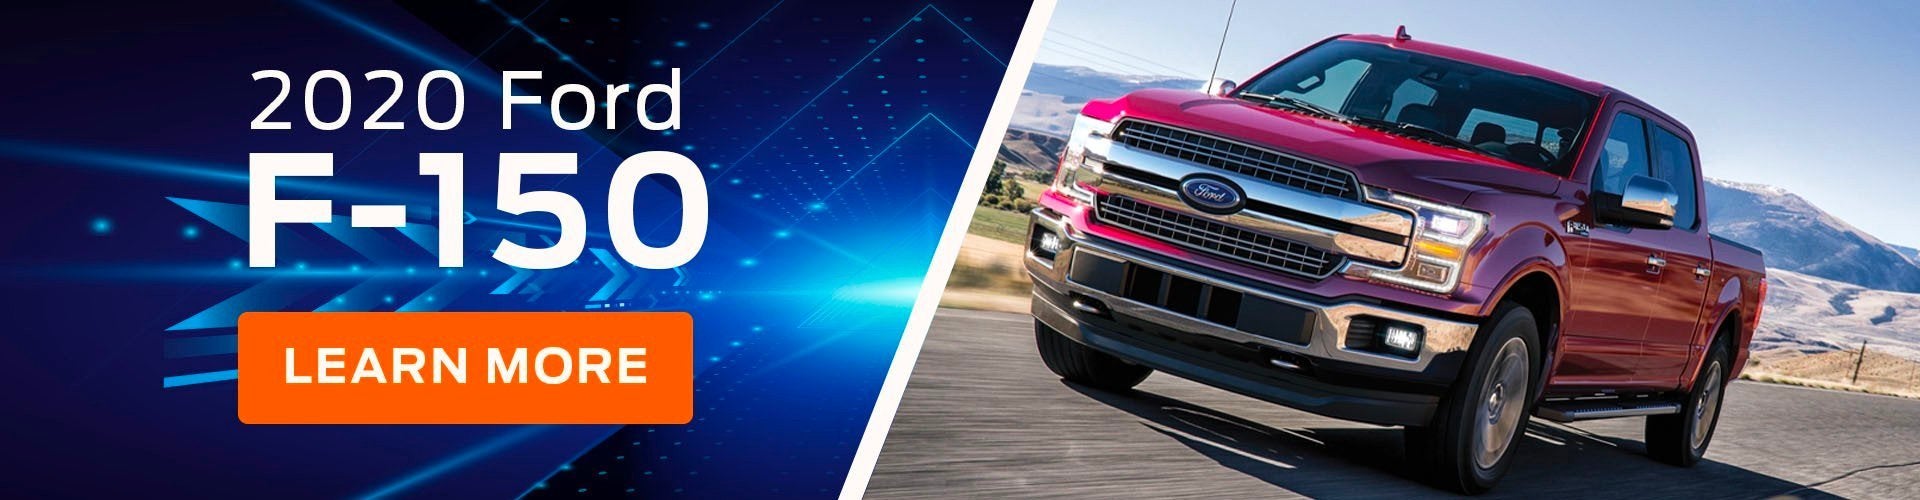 2020 Ford F-150: Learn More